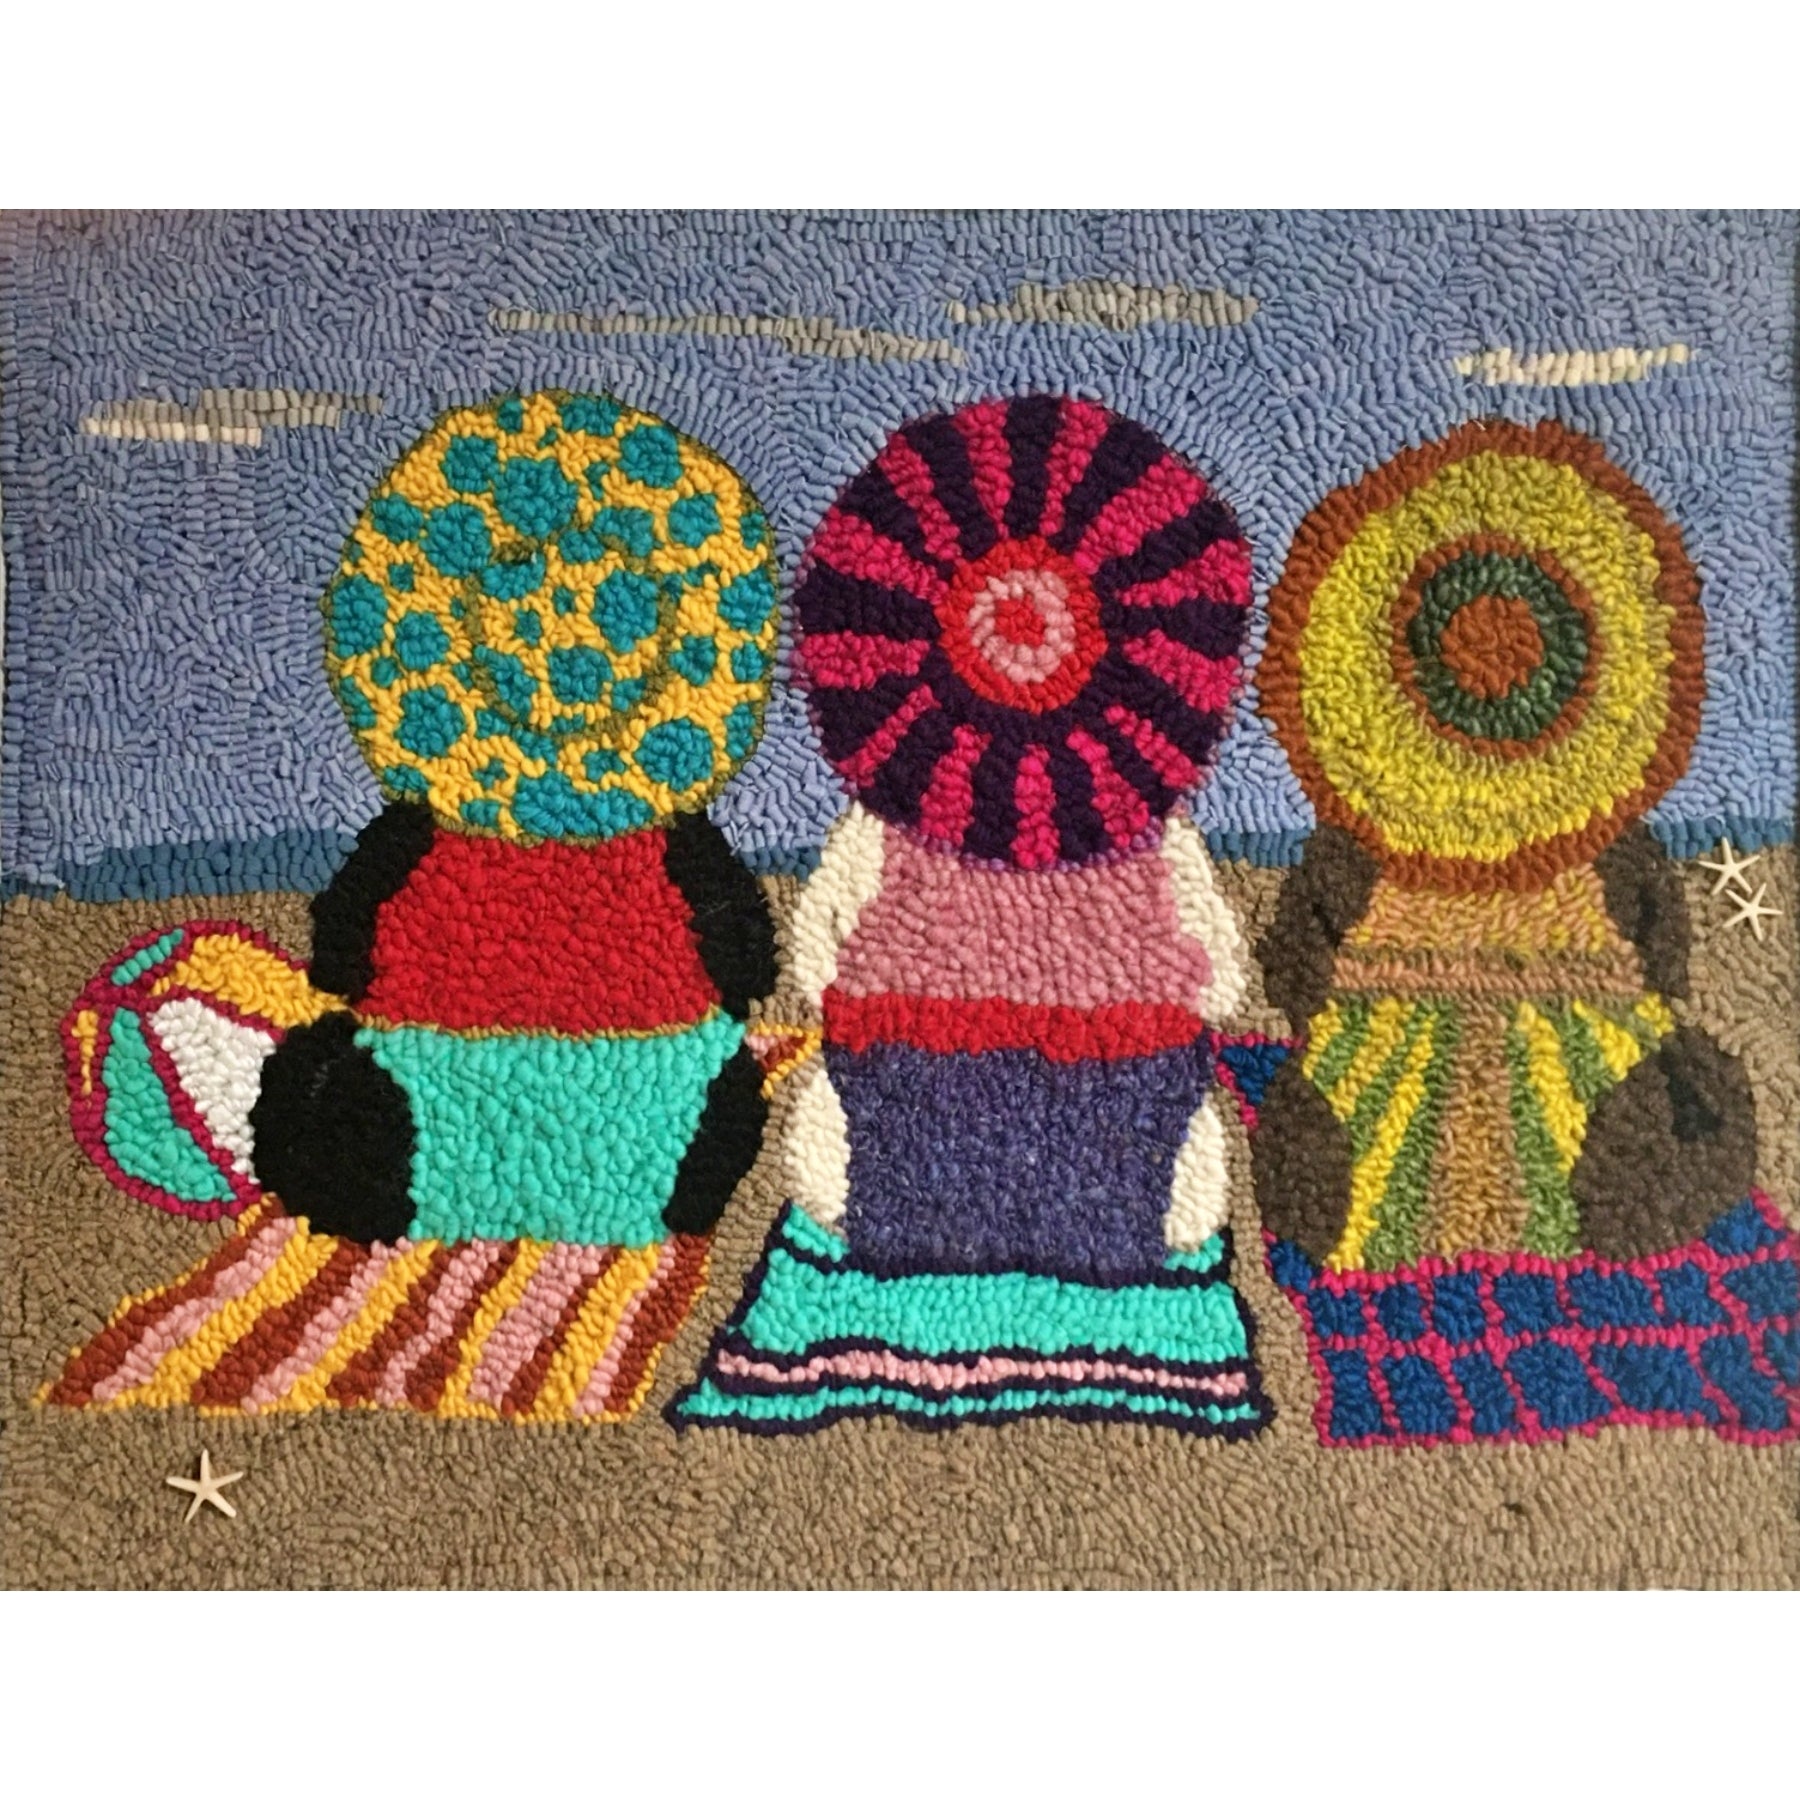 The Girls Catching Some Rays, rug hooked by Patrica Wharton